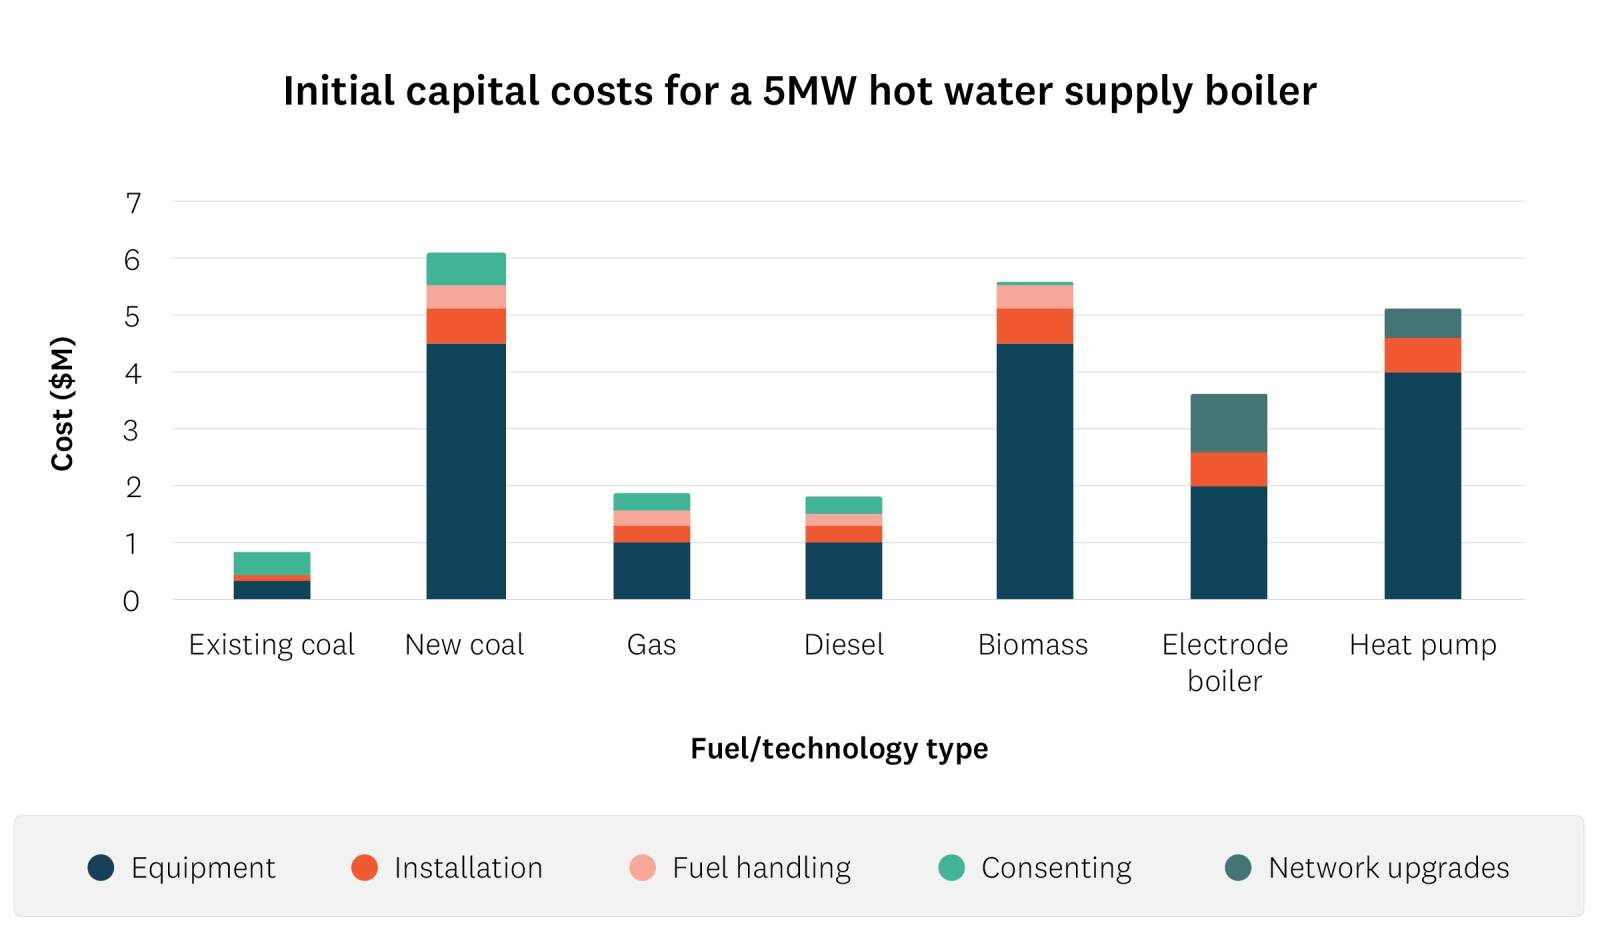 Graph shows comparative initial capital costs for different types of 5MW hot water supply boilers.. 